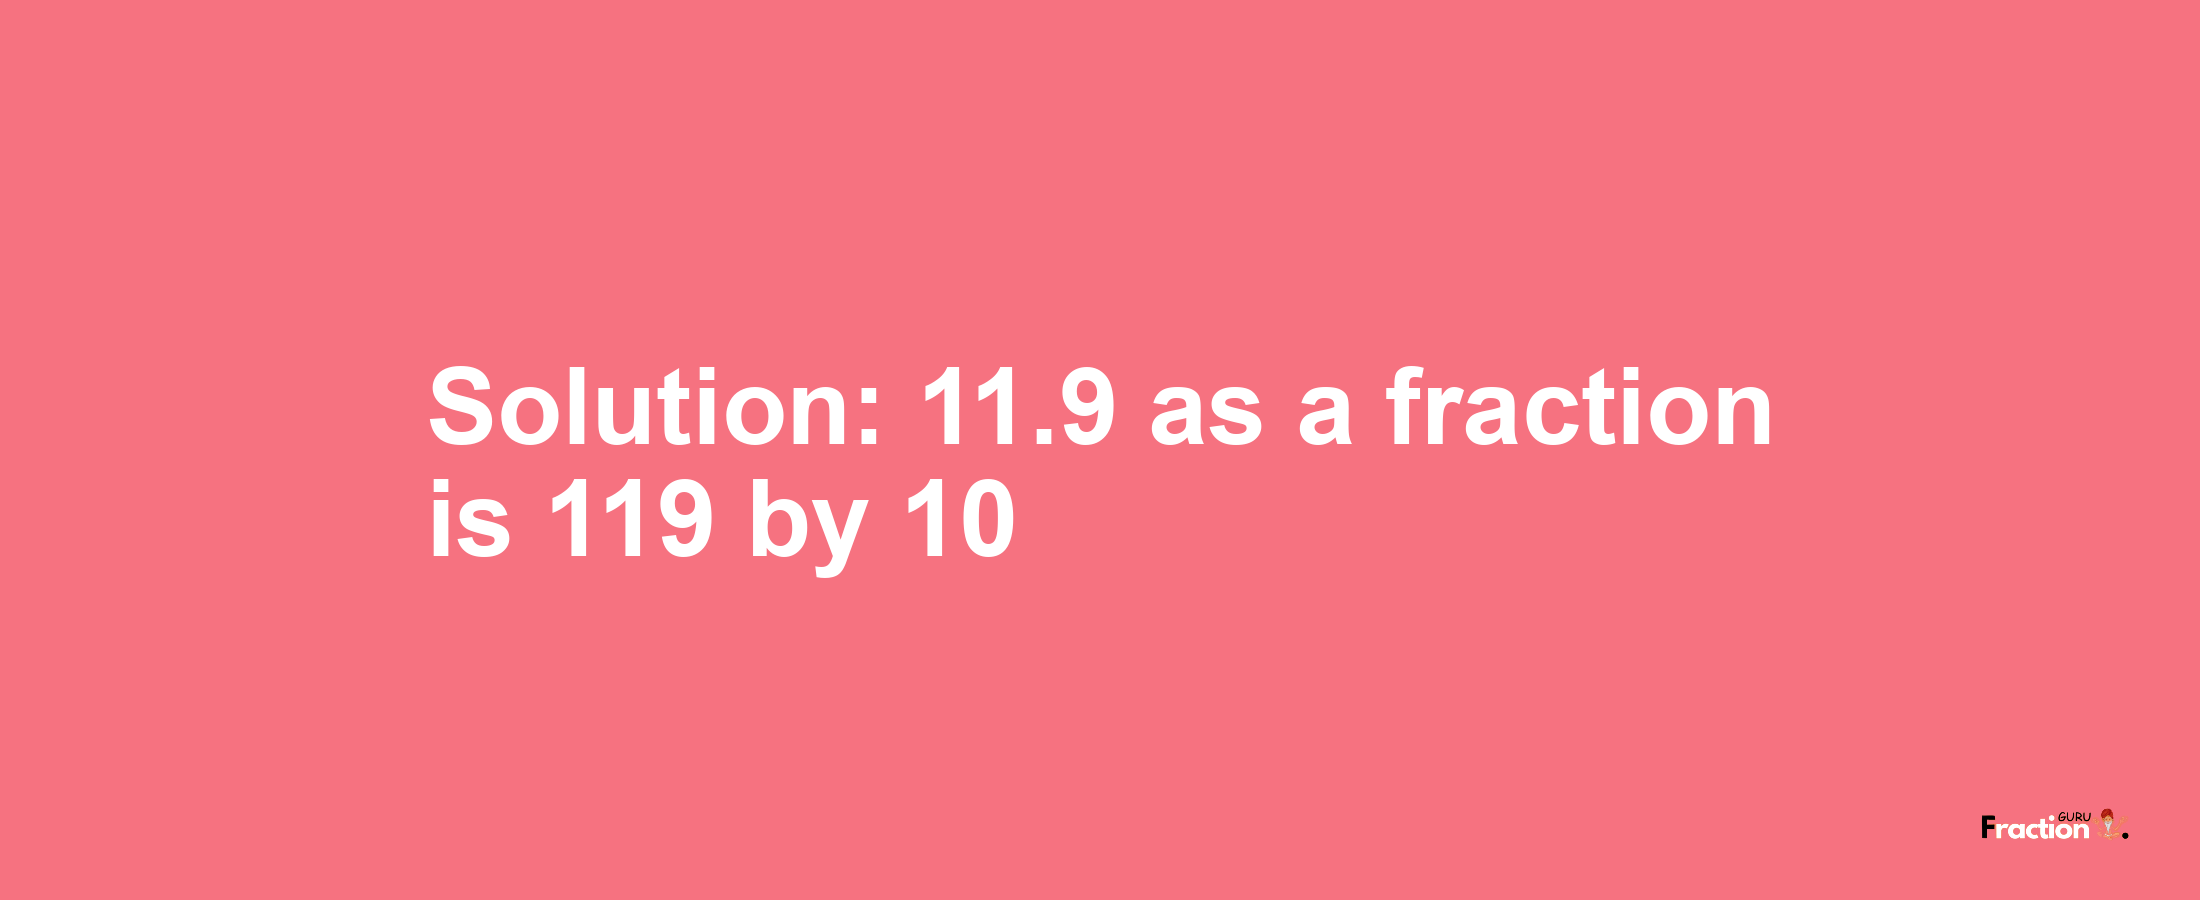 Solution:11.9 as a fraction is 119/10